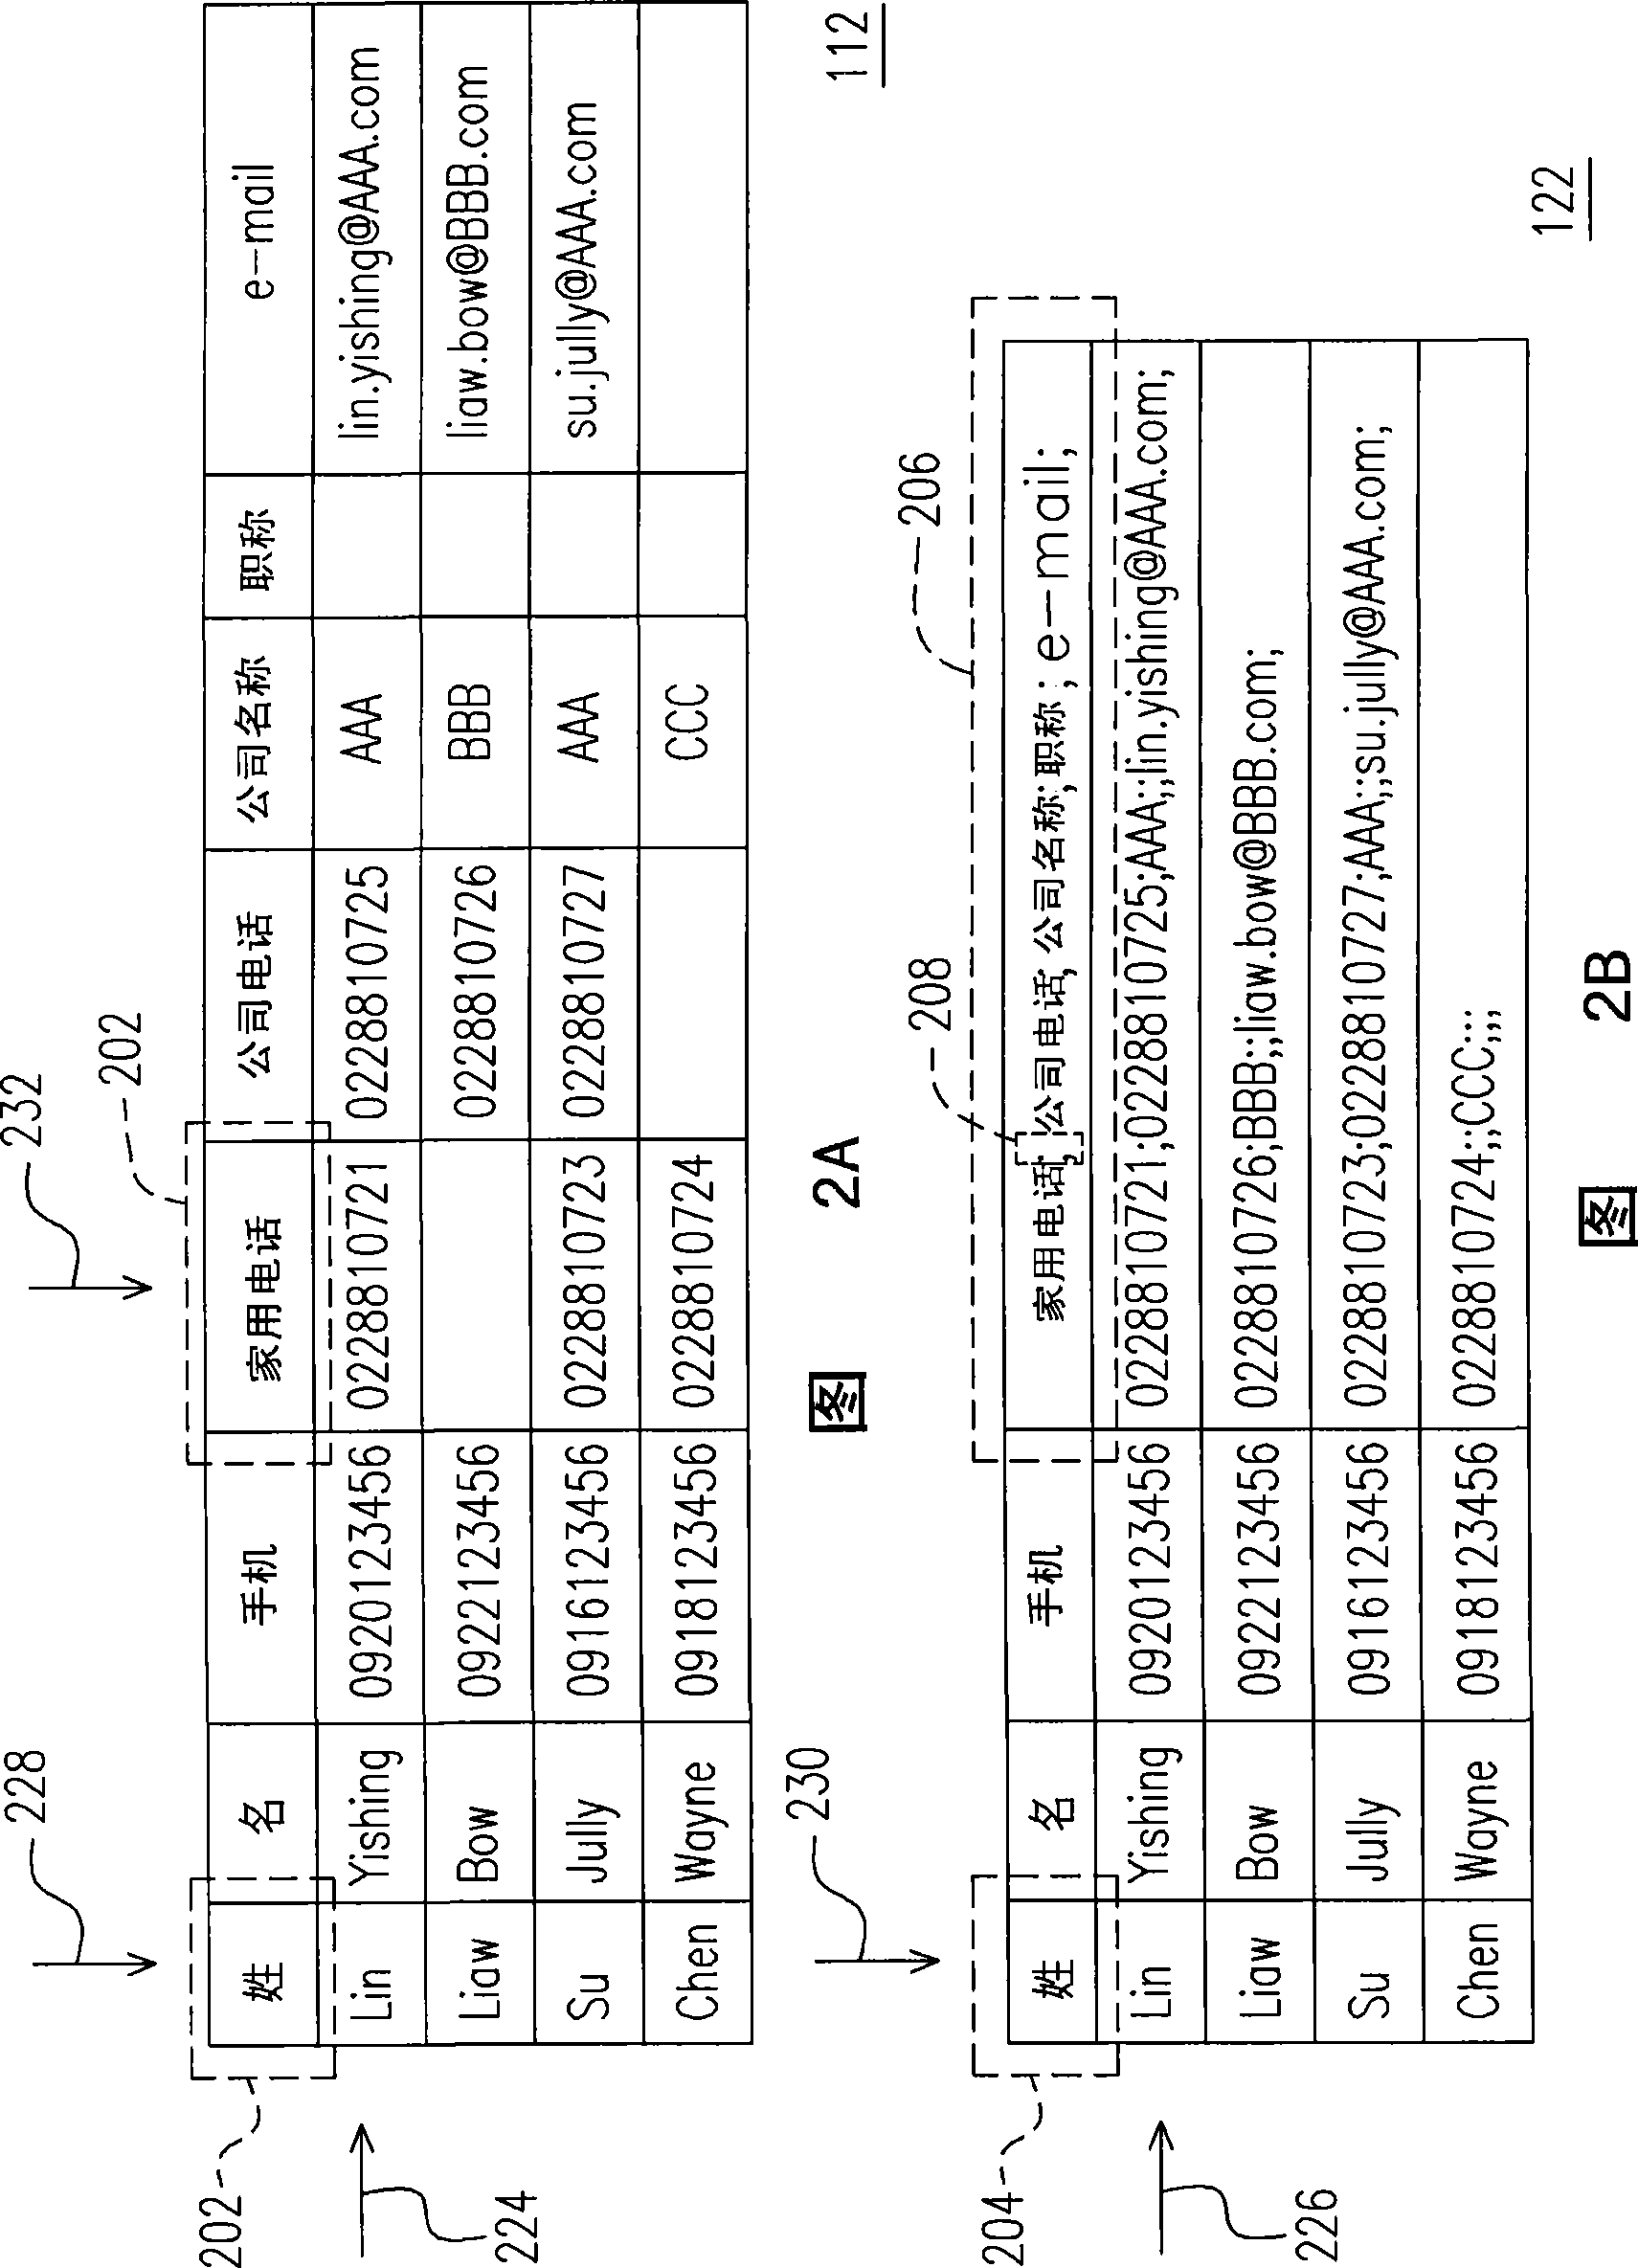 Compressible database structure and database conversion method and system